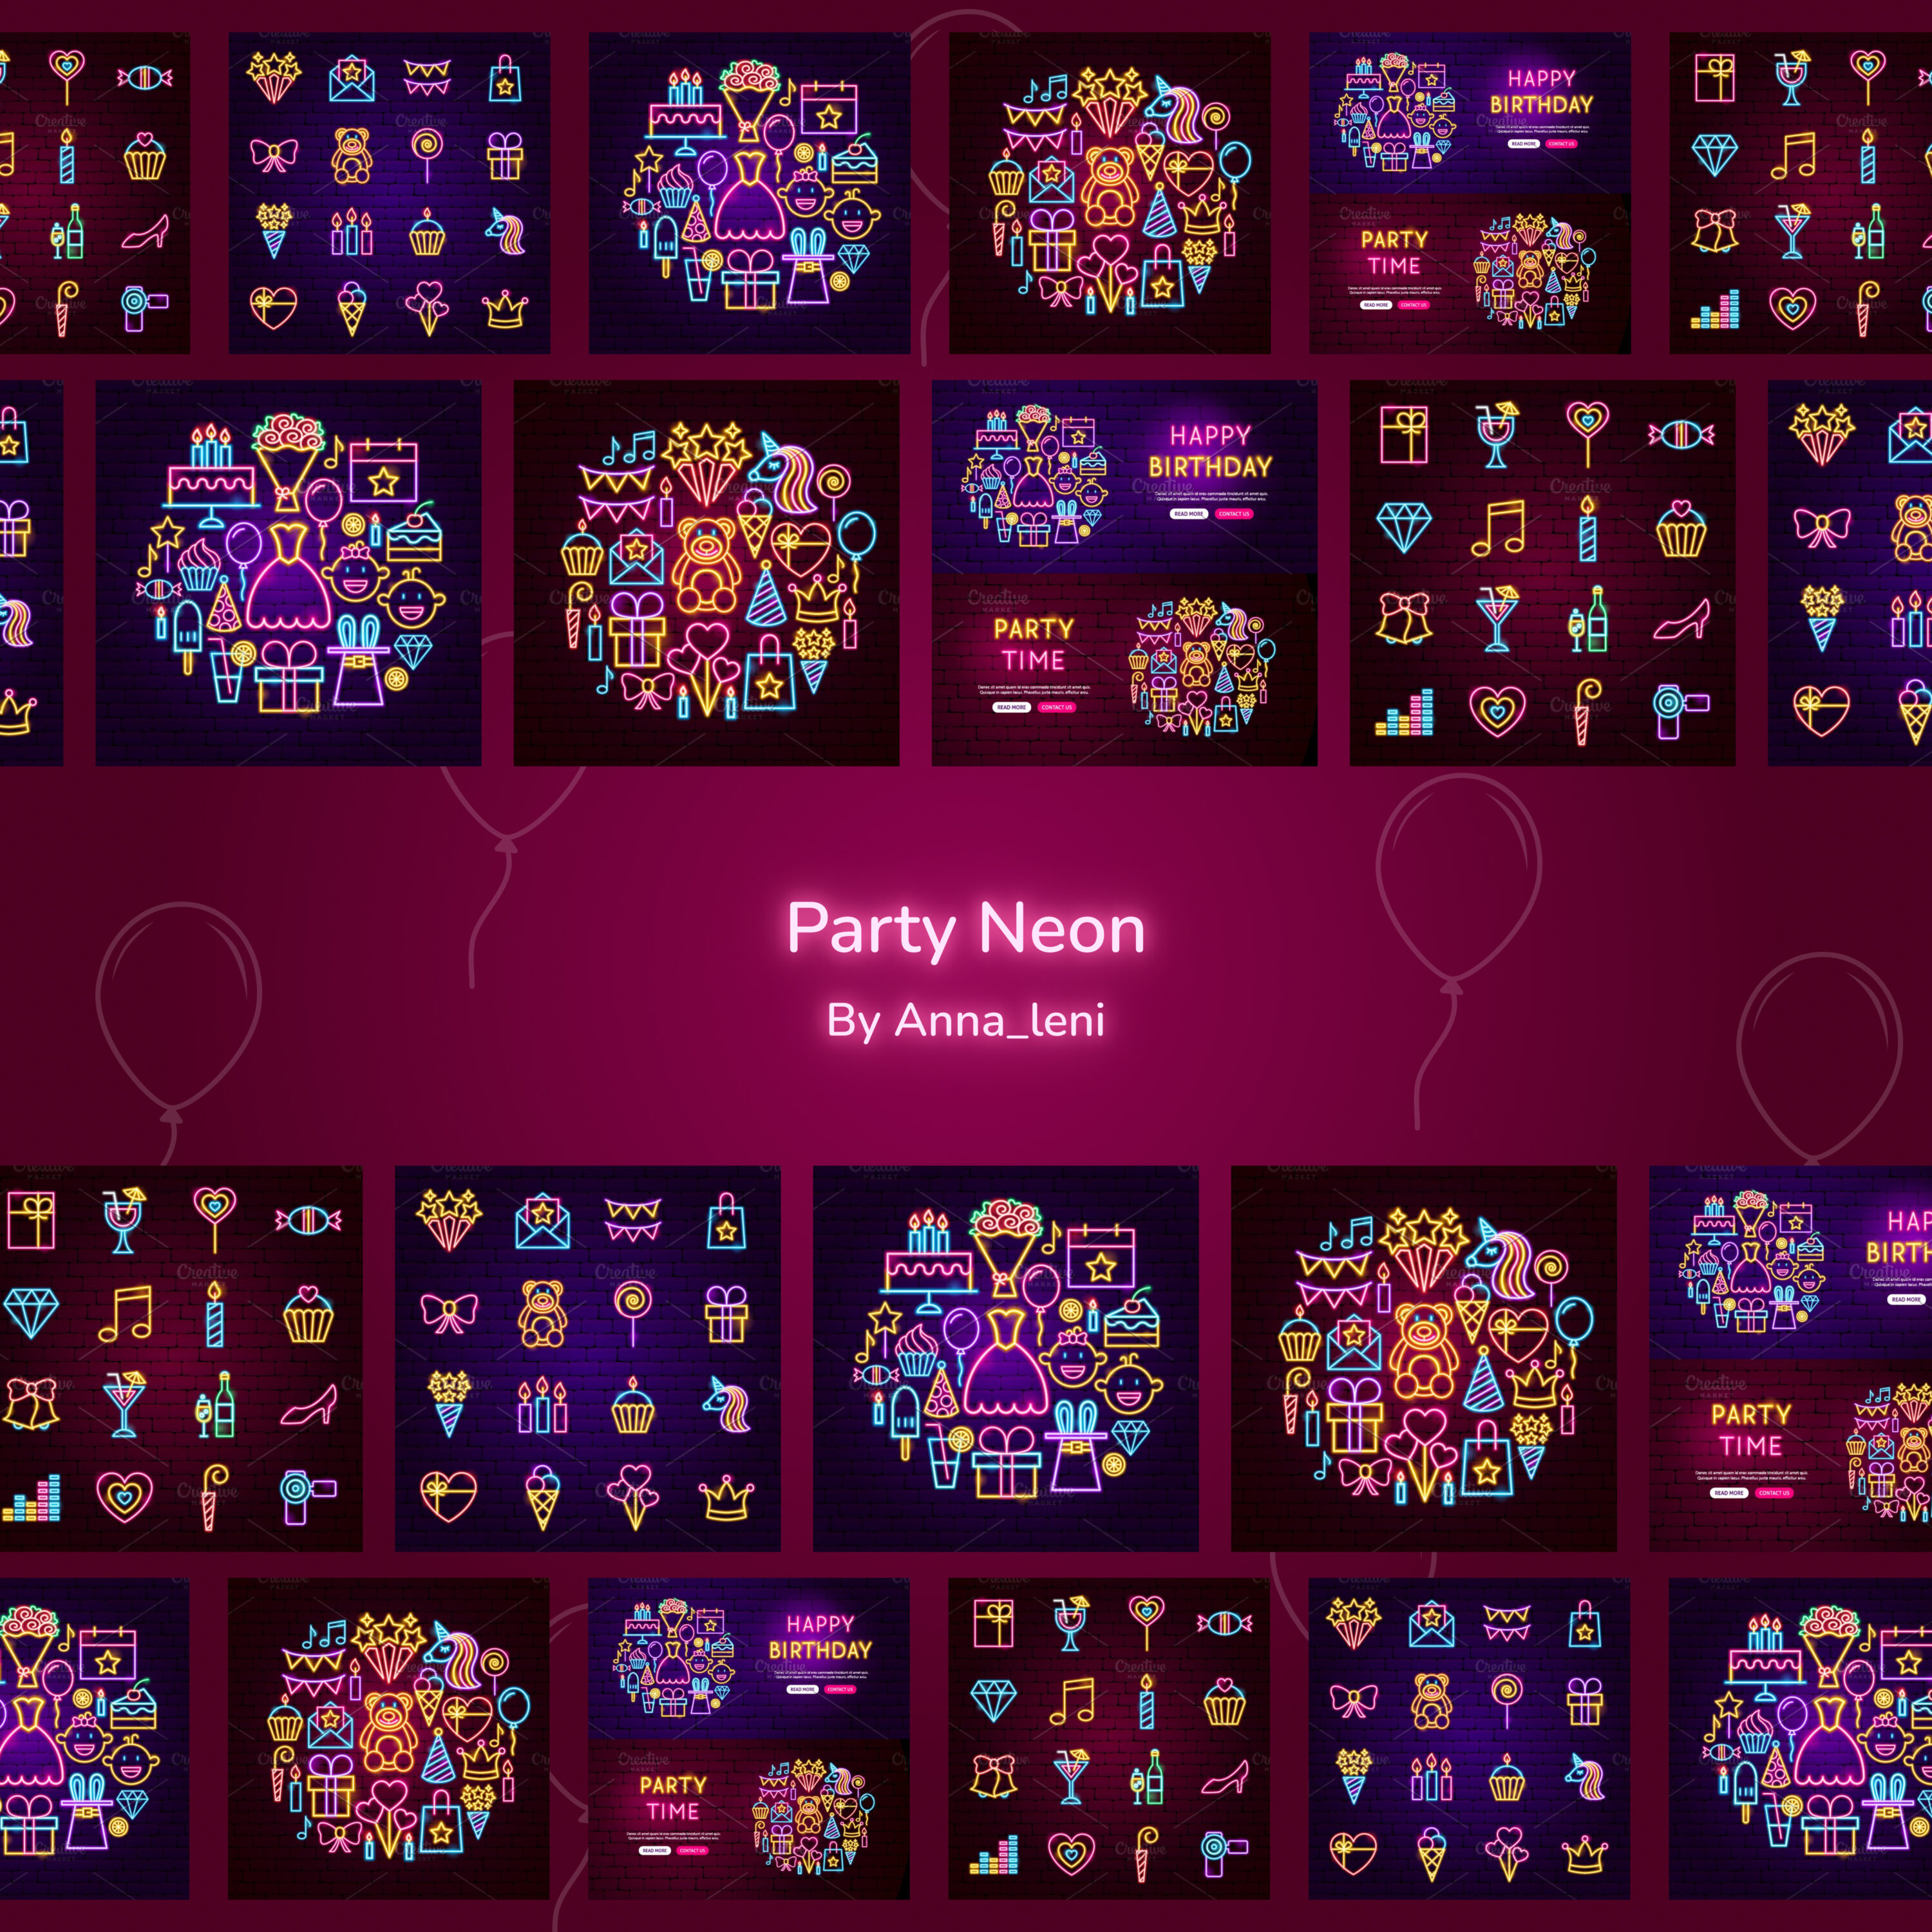 Party neon image preview.